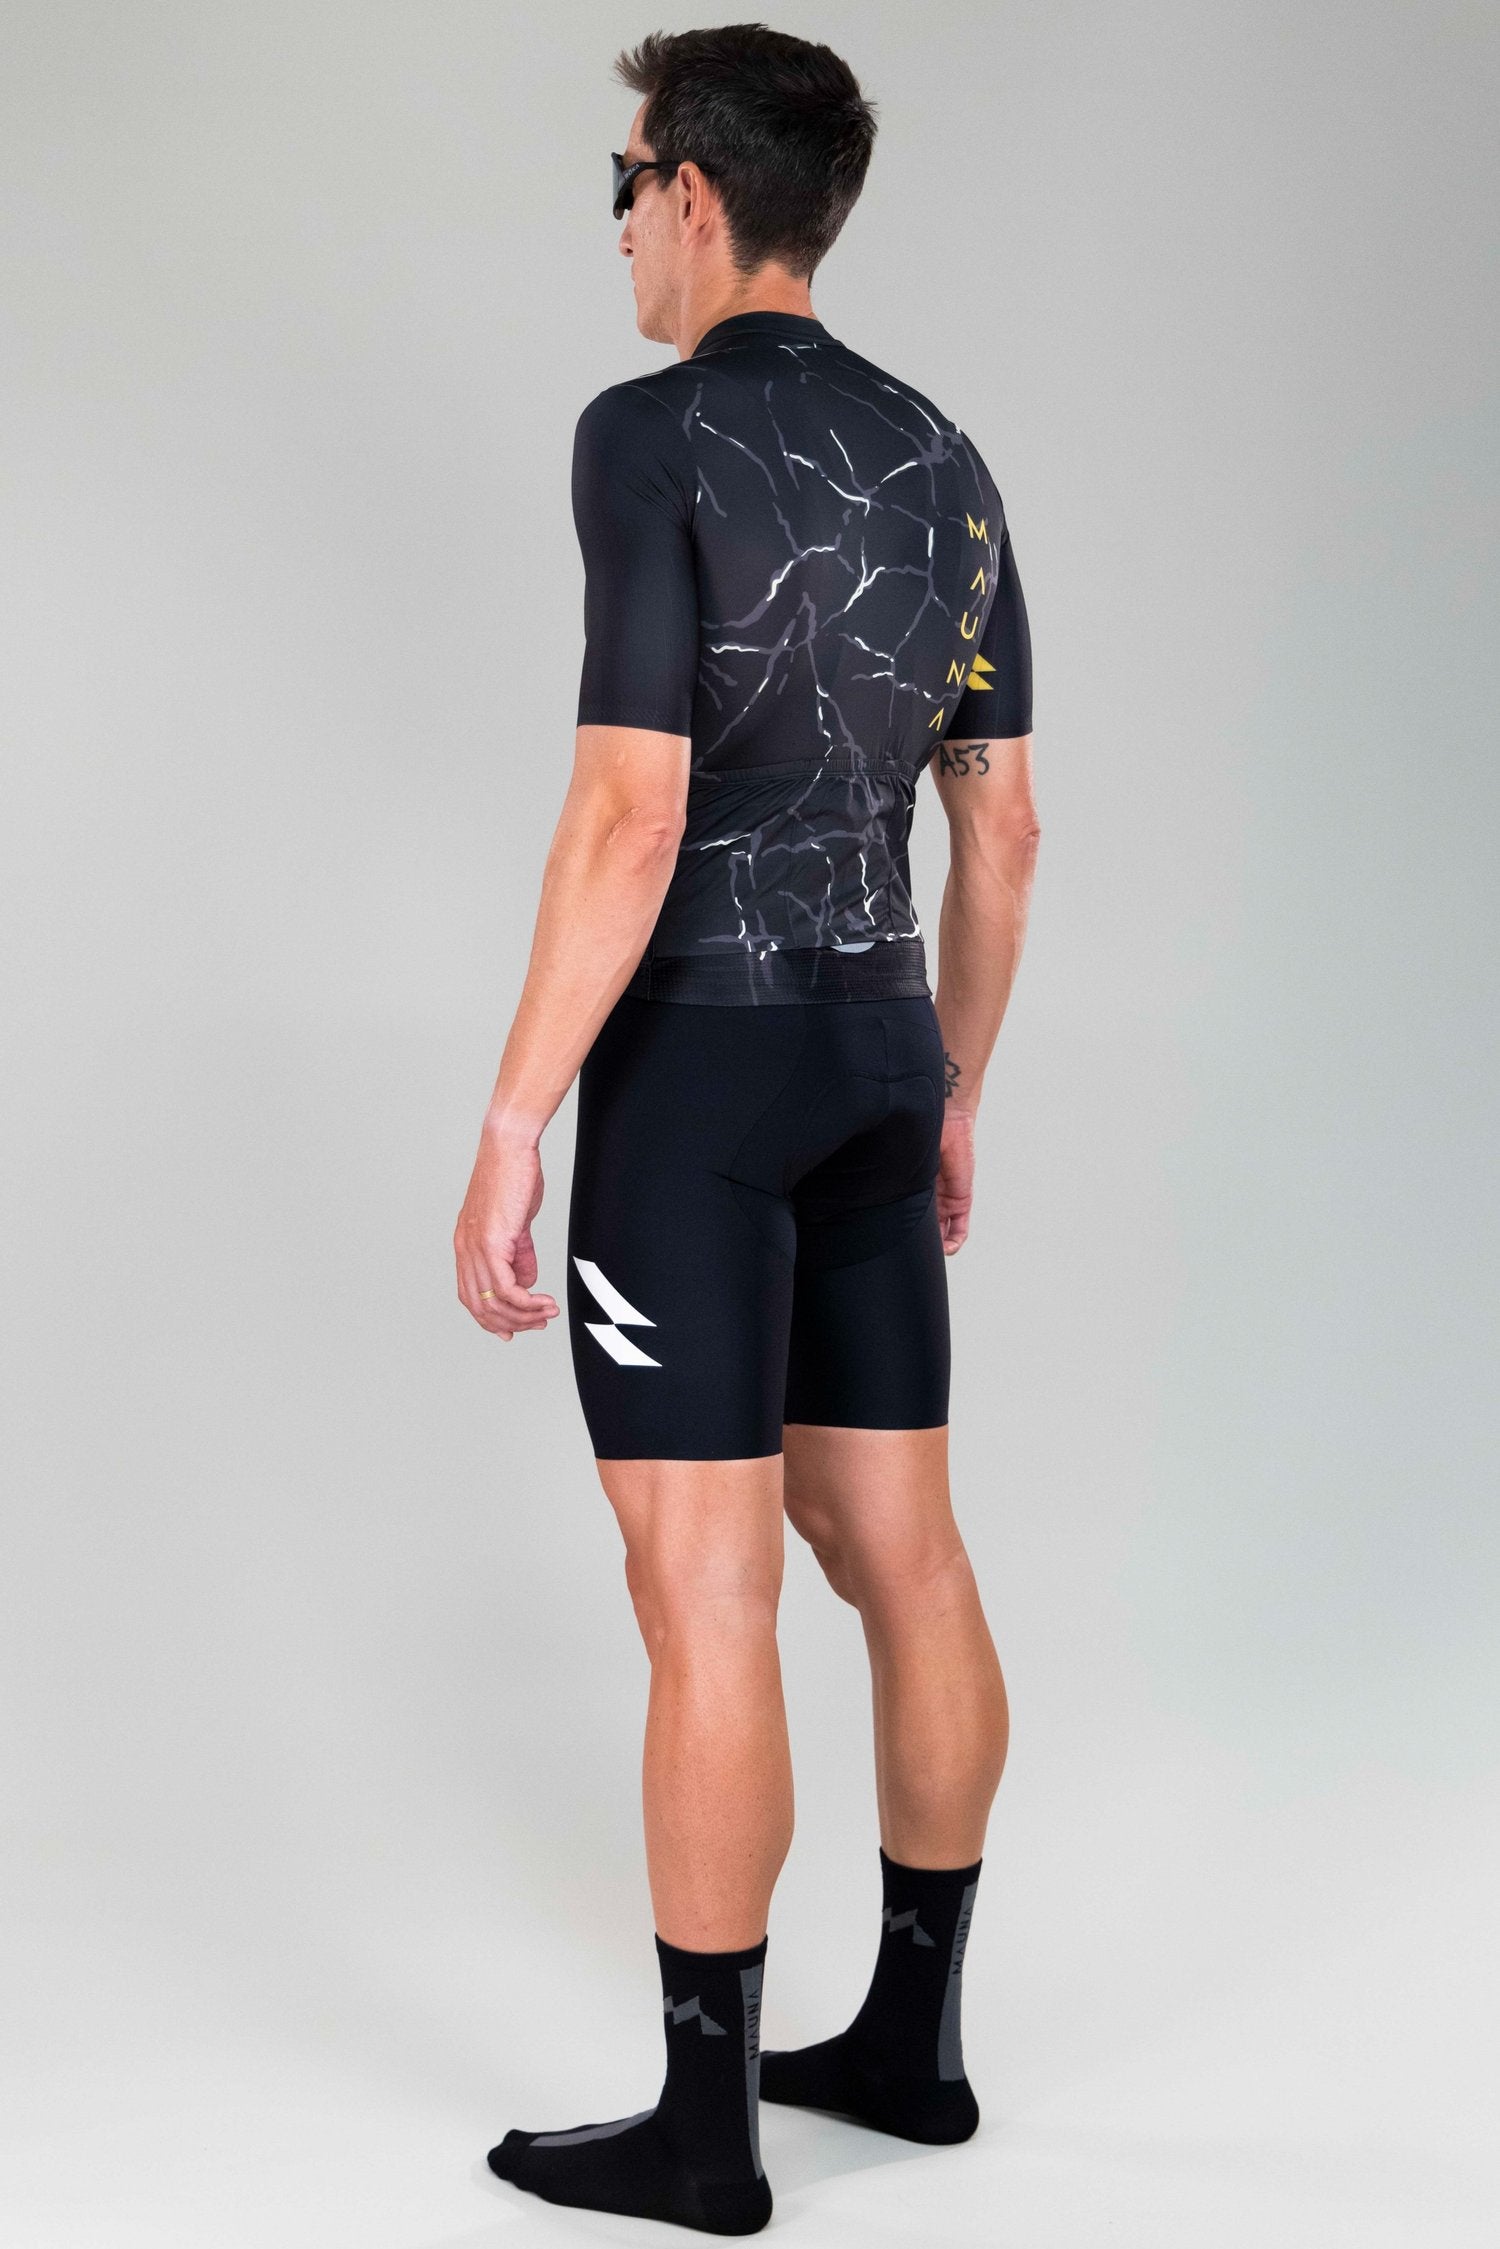 back left-side view of man wearing Eldhraun force cycling jersey in black